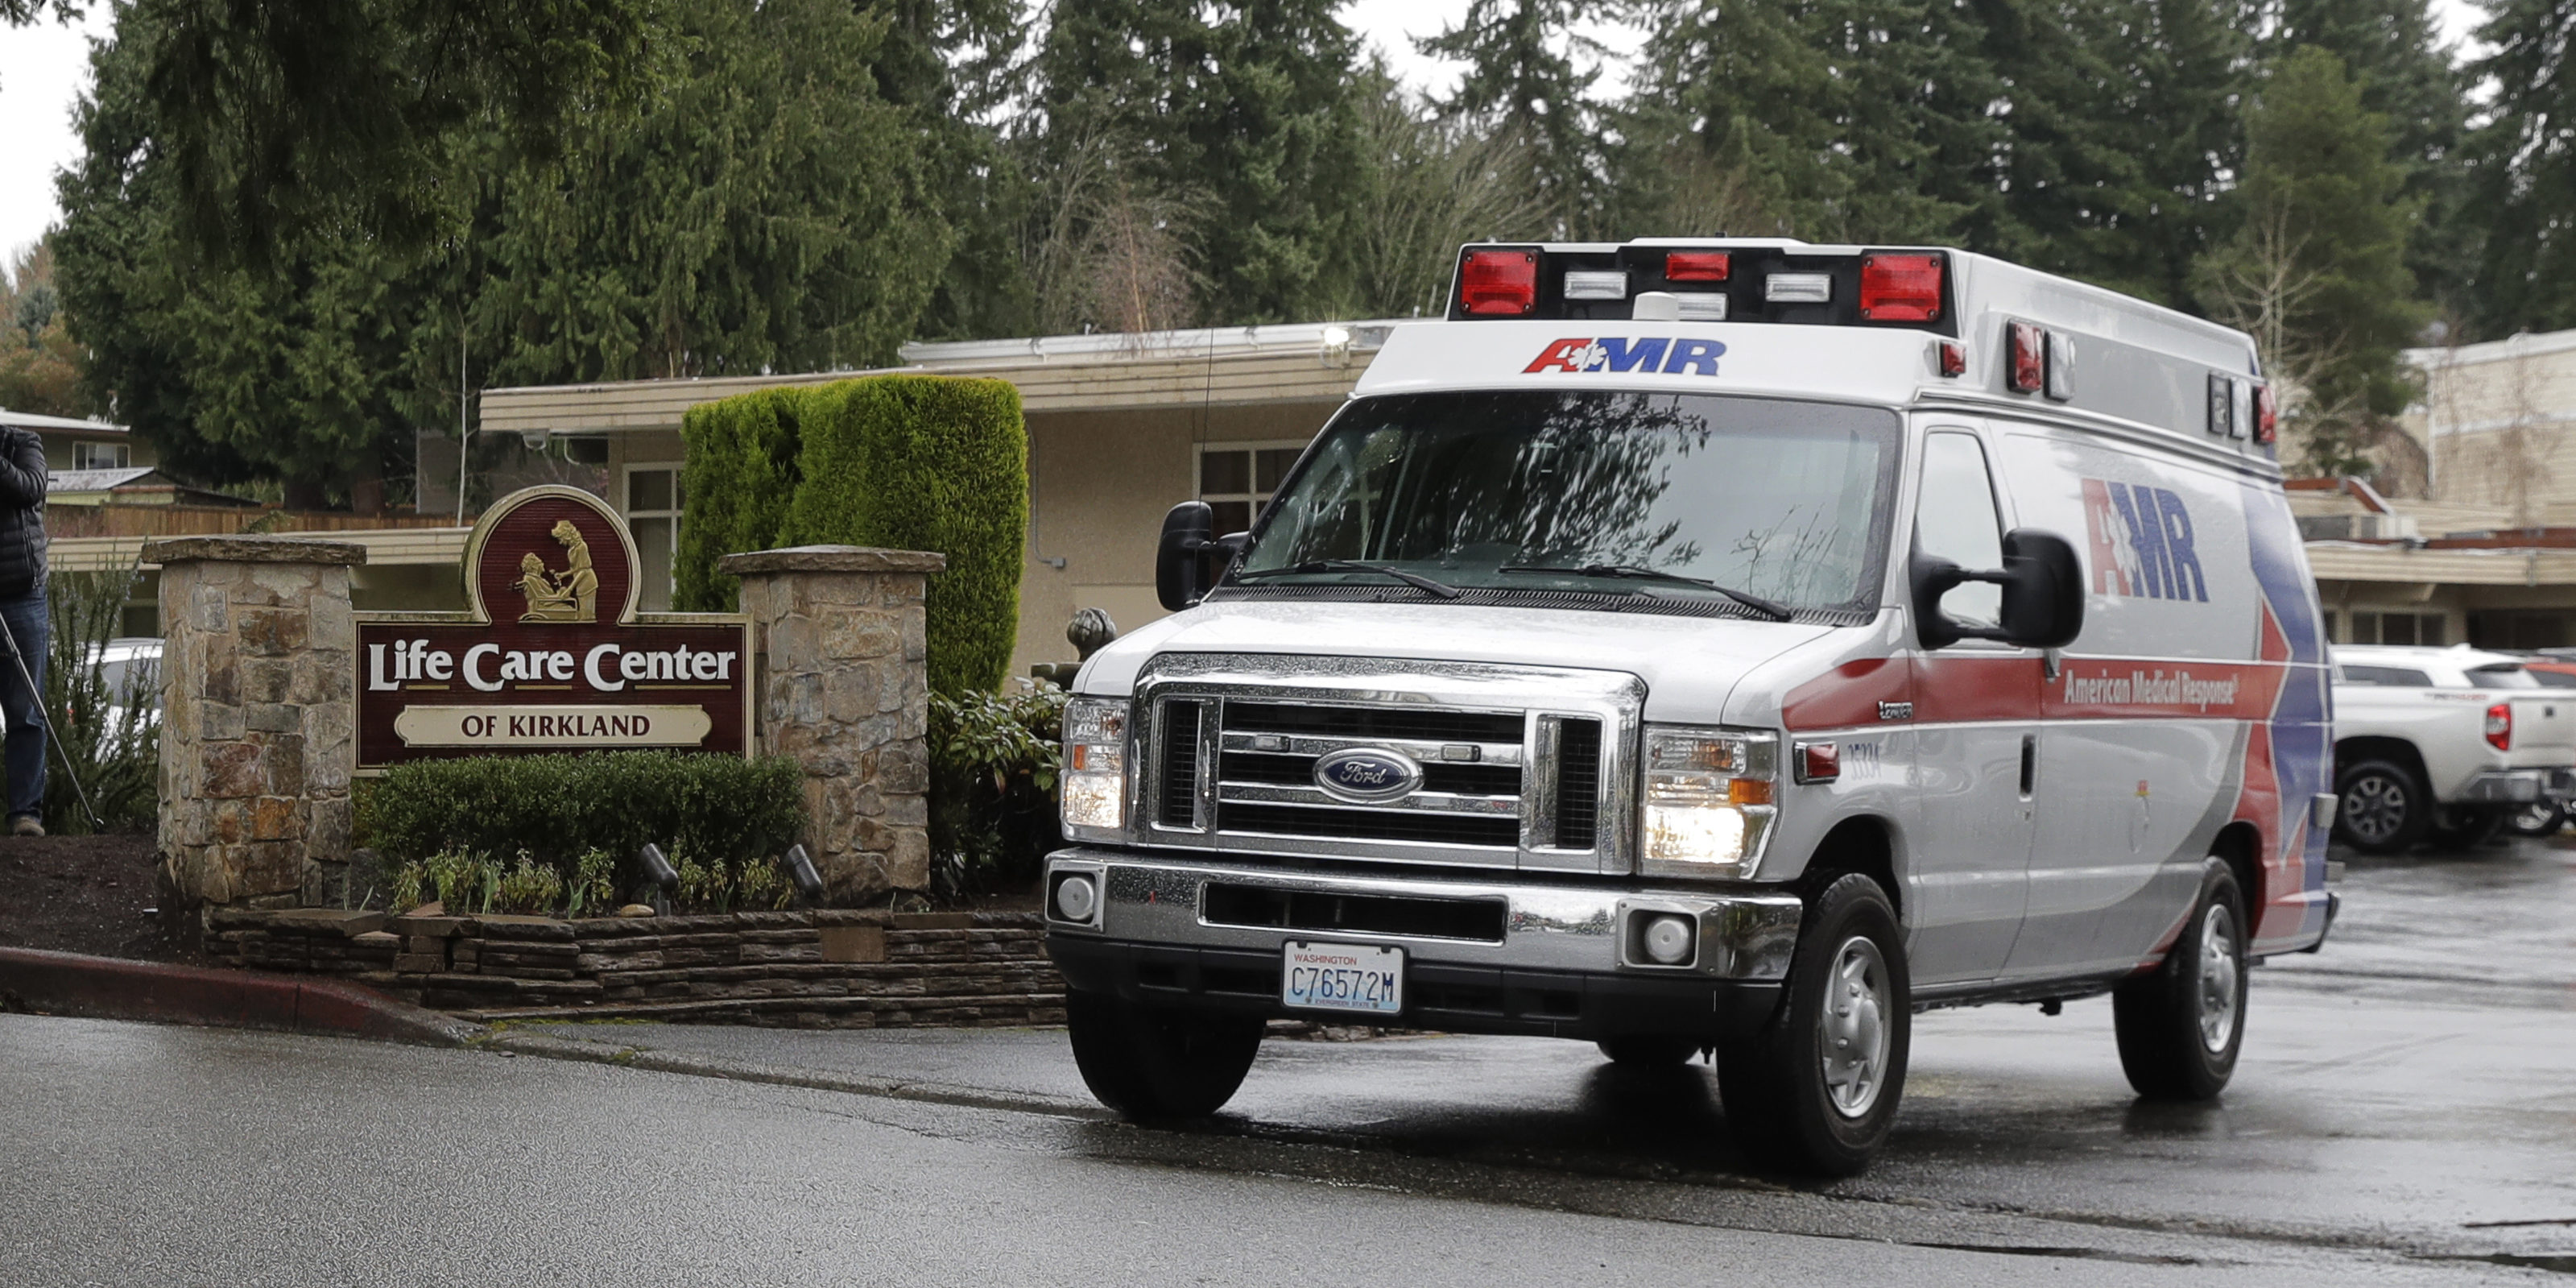 An ambulance leaves the Life Care Center in Kirkland, Wash., Friday, March 6, 2020. The facility is the epicenter of the outbreak of the the COVID-19 coronavirus in Washington state. (AP Photo/Ted S. Warren)